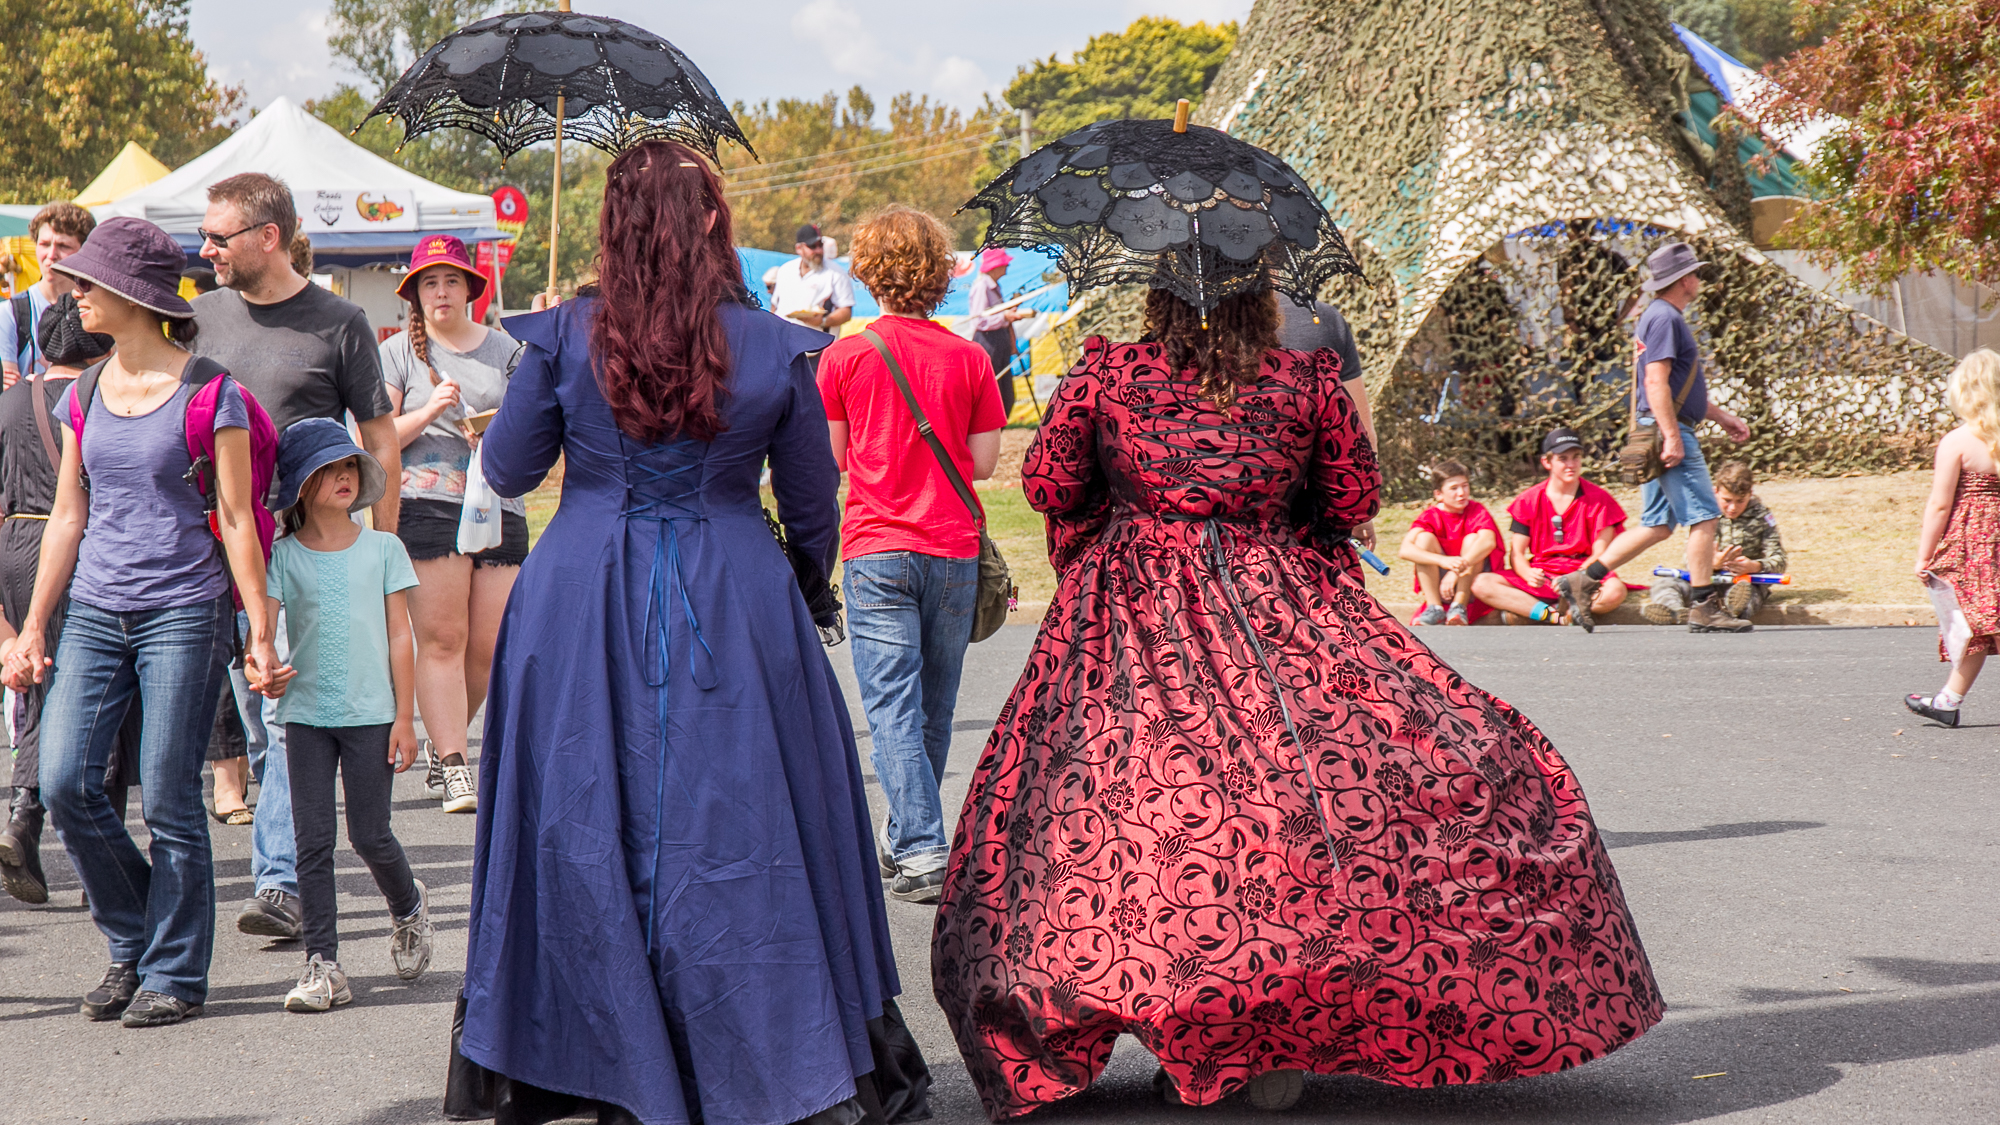 Backs of women with lace parasols and big dresses laced at the back